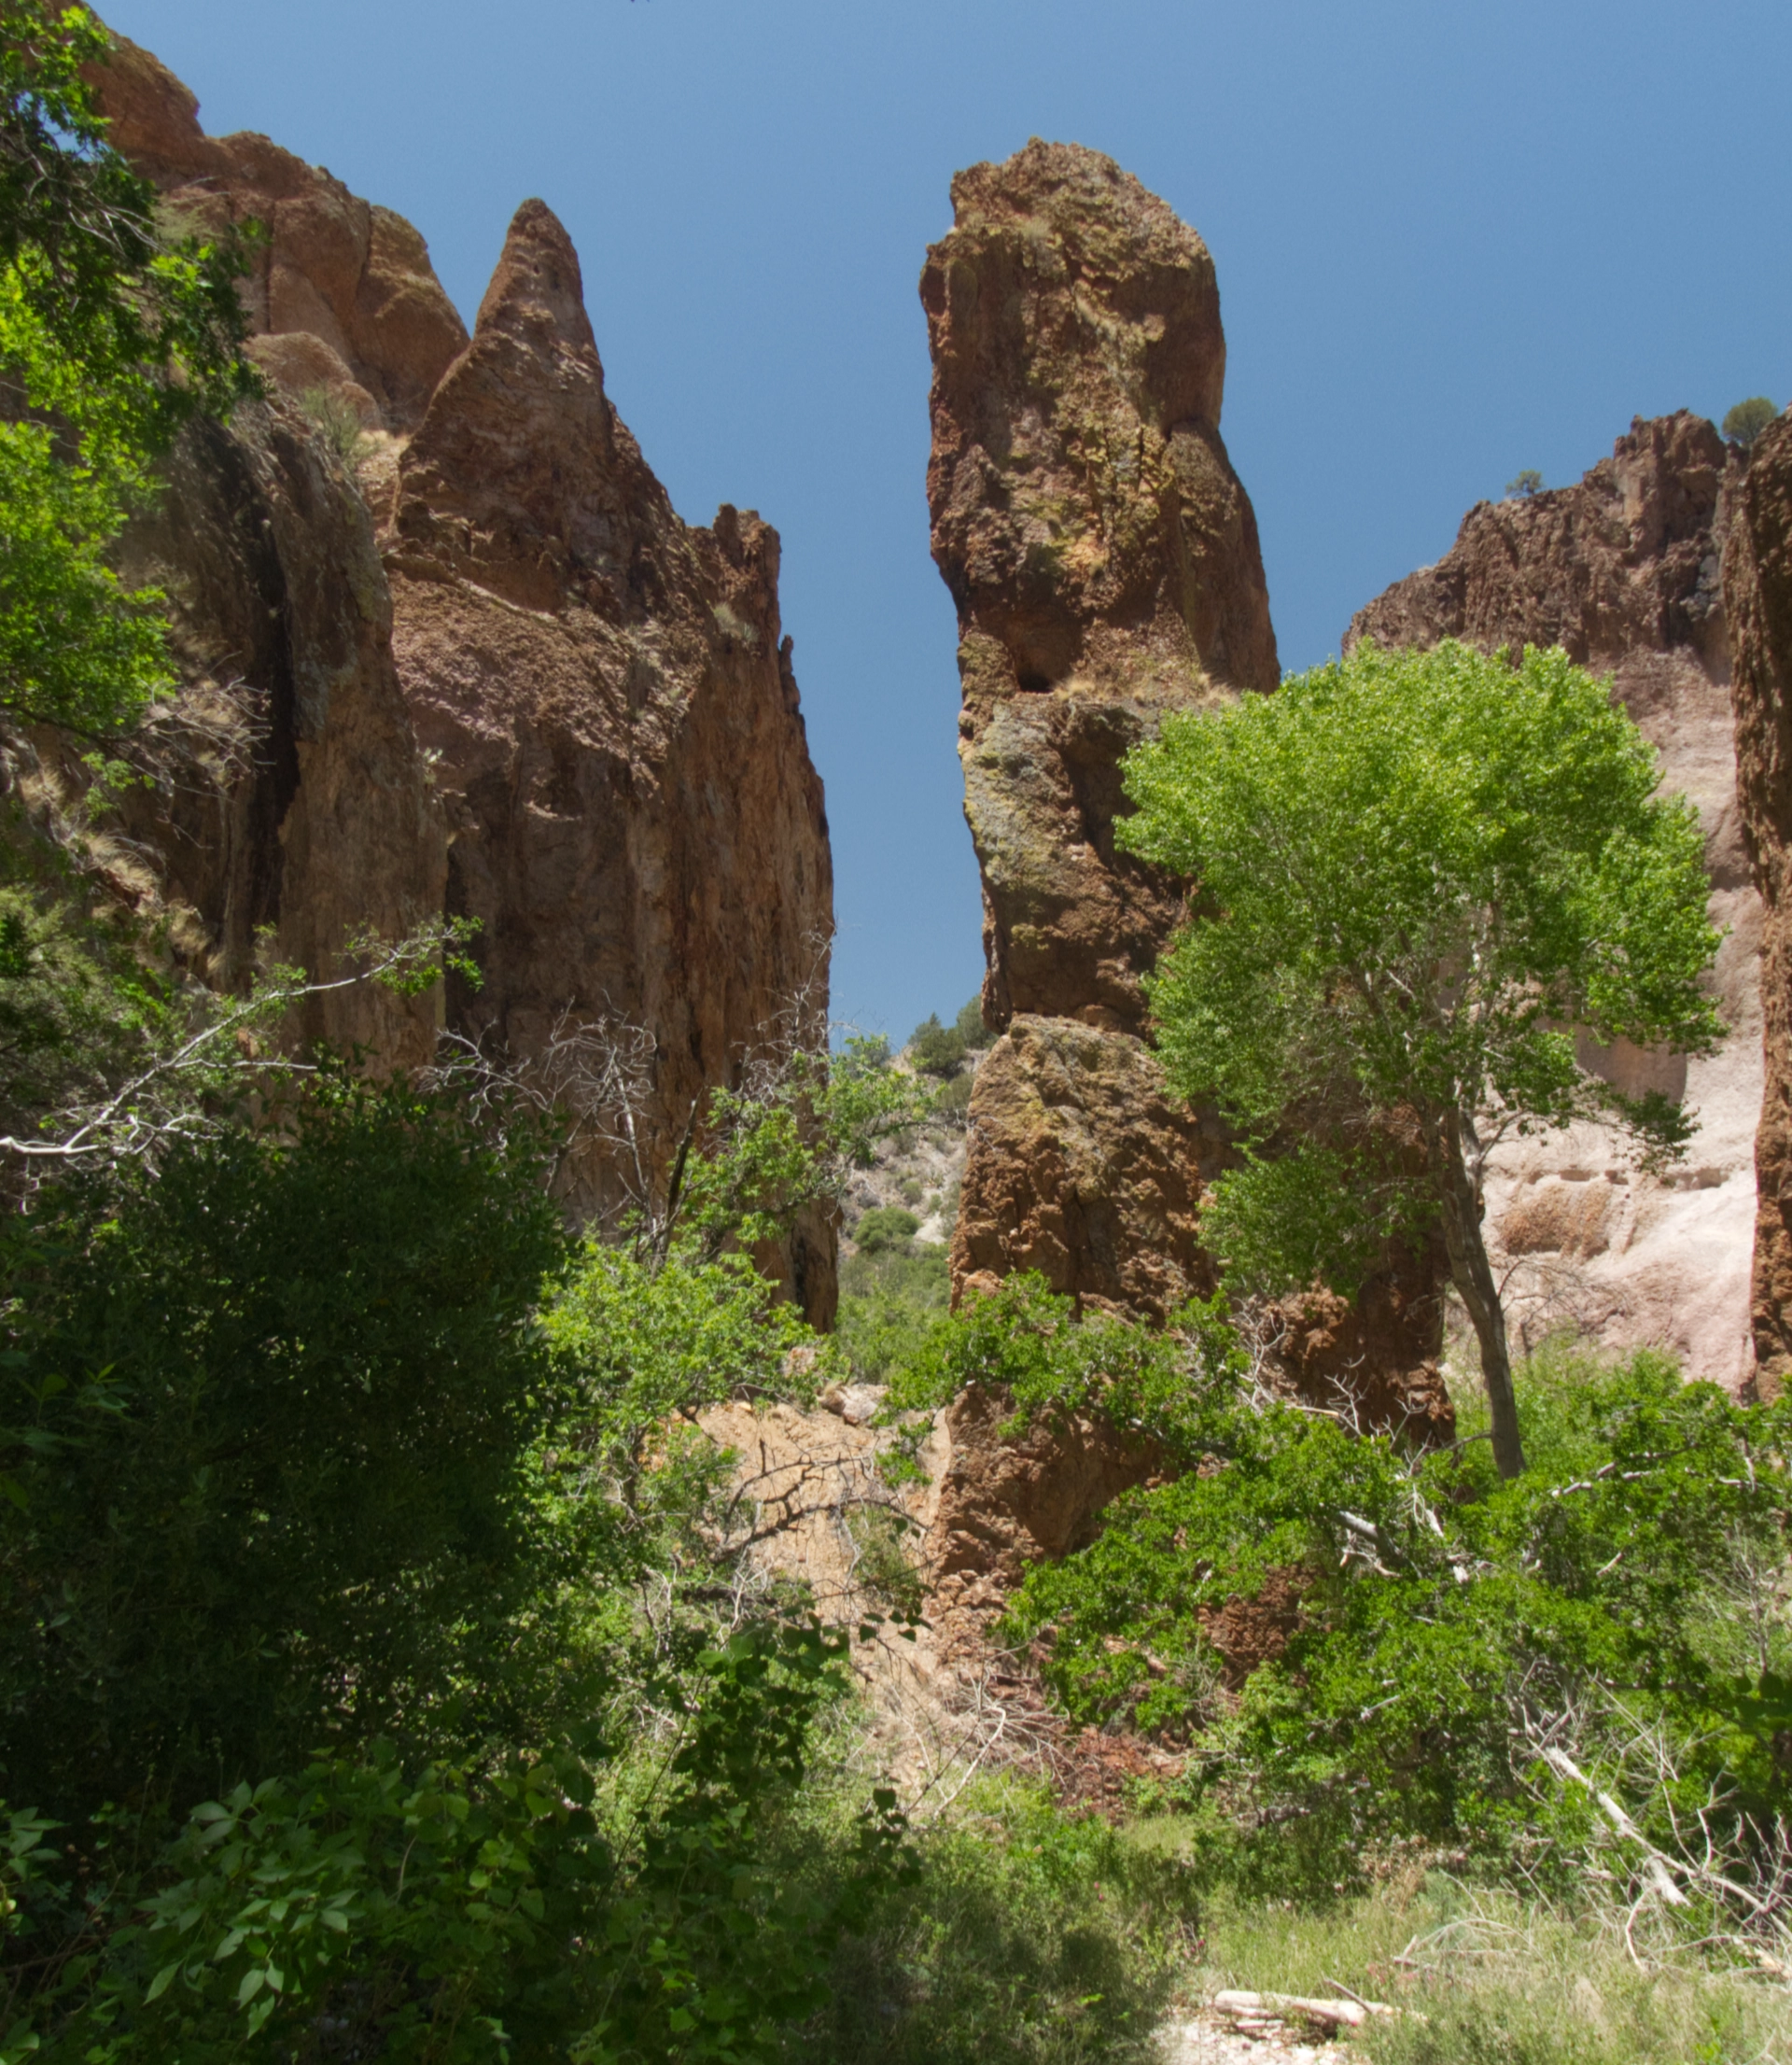 pinnacles near the mouth of the canyon